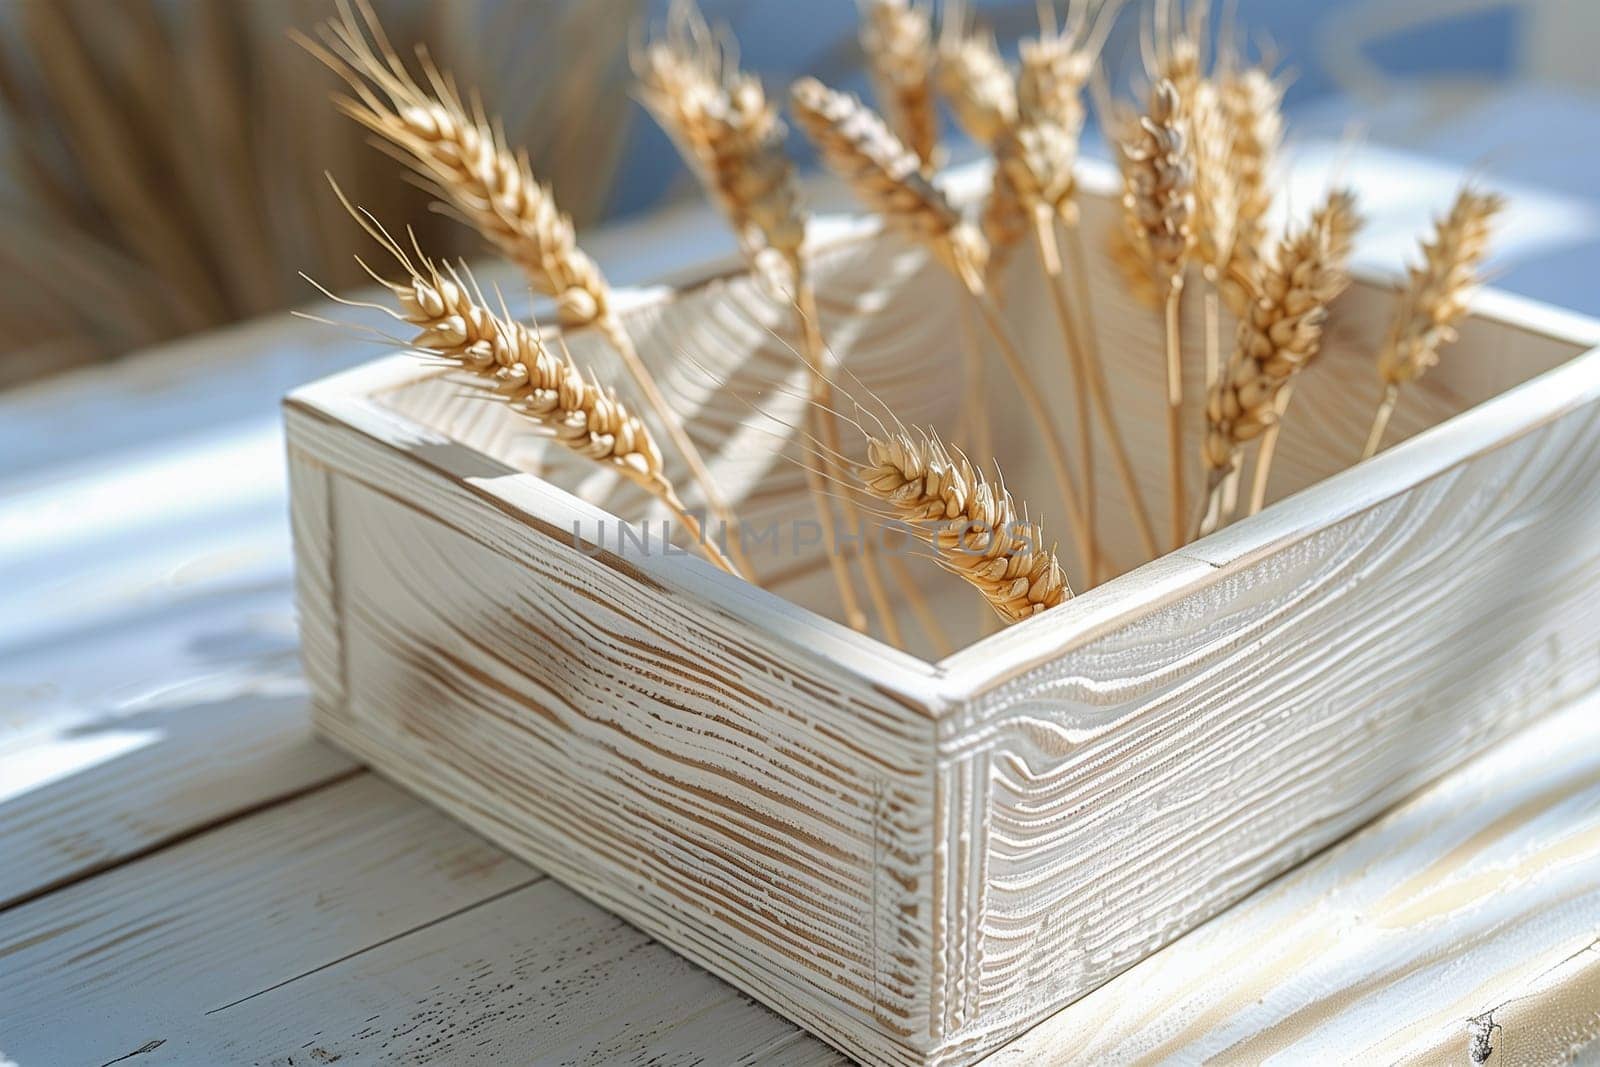 Wooden Box Filled With Wheat on Table by Sd28DimoN_1976